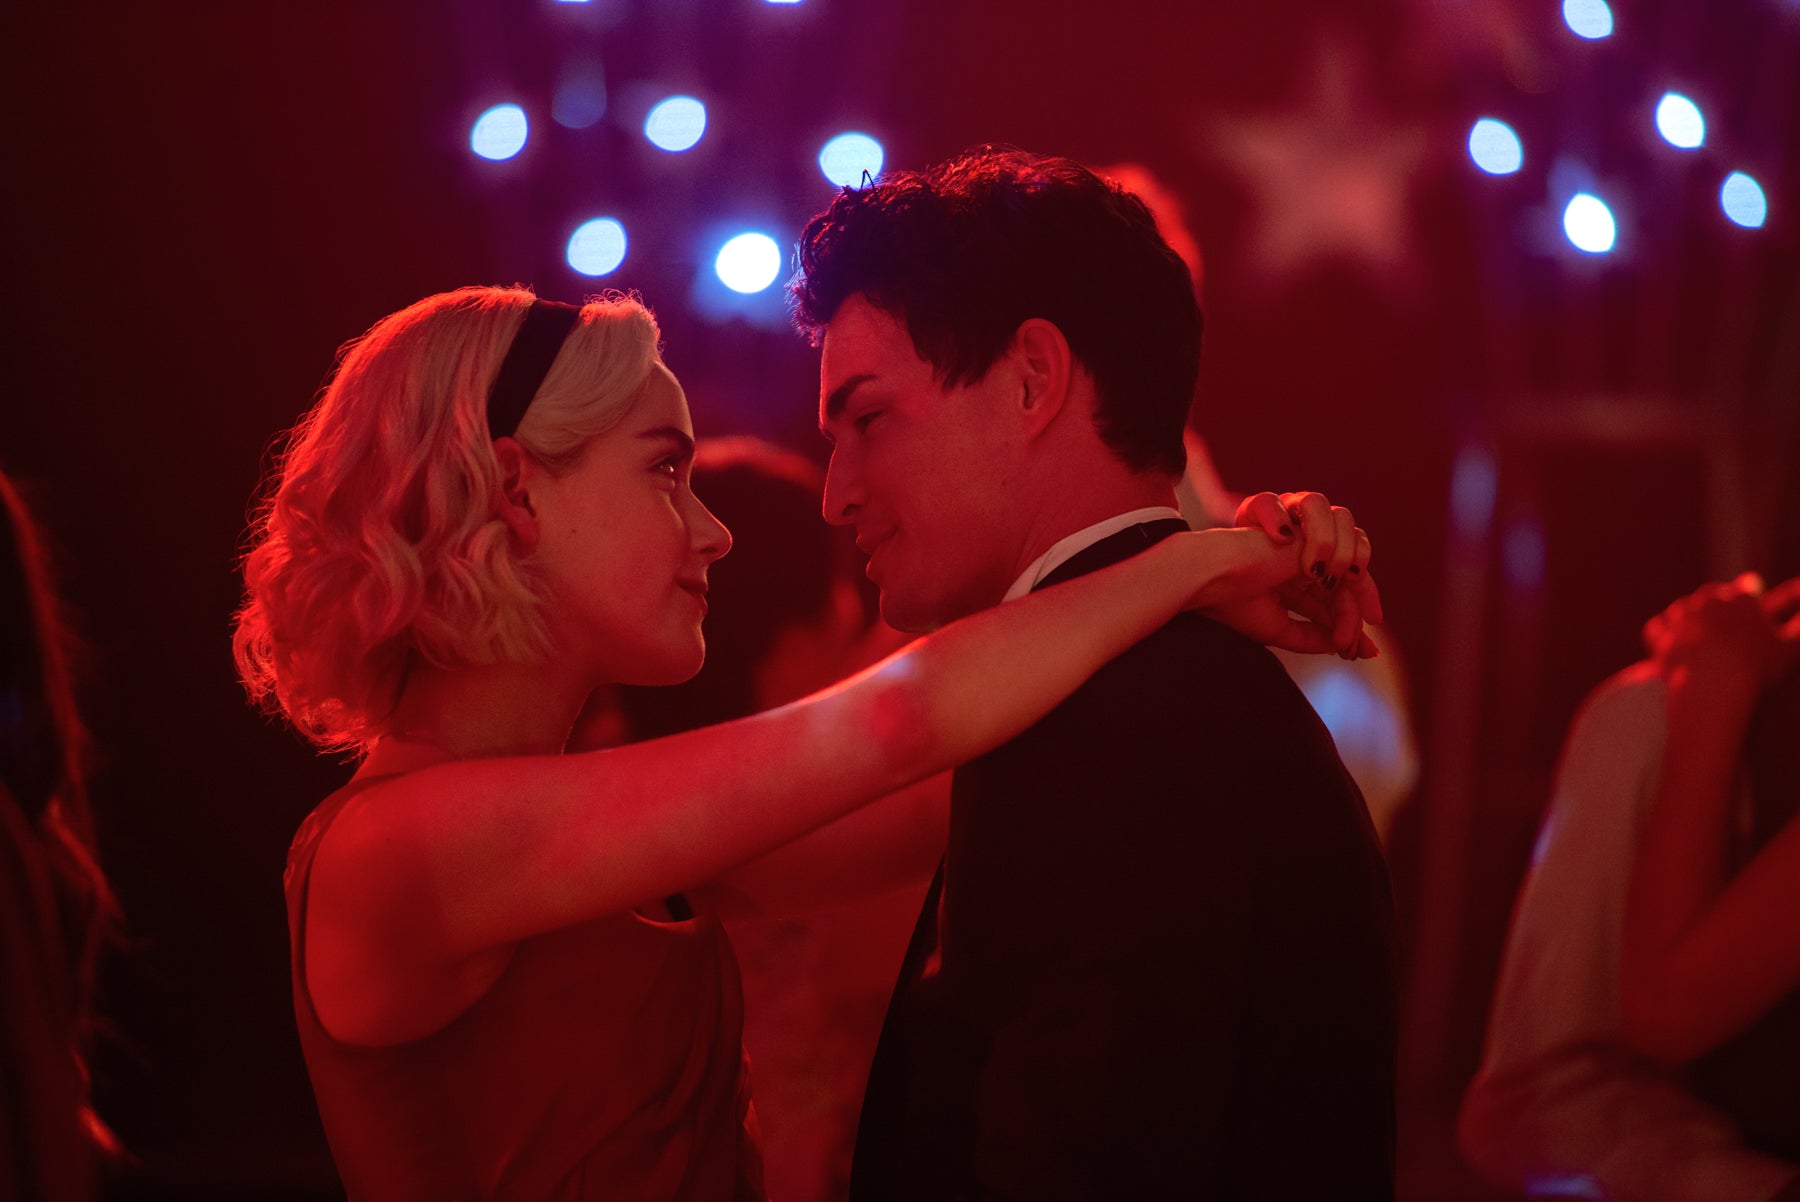 Sabrina Spellman slow dances with Nick at a Valentine’s Day dance in a scene from Chilling Adventures of Sabrina.